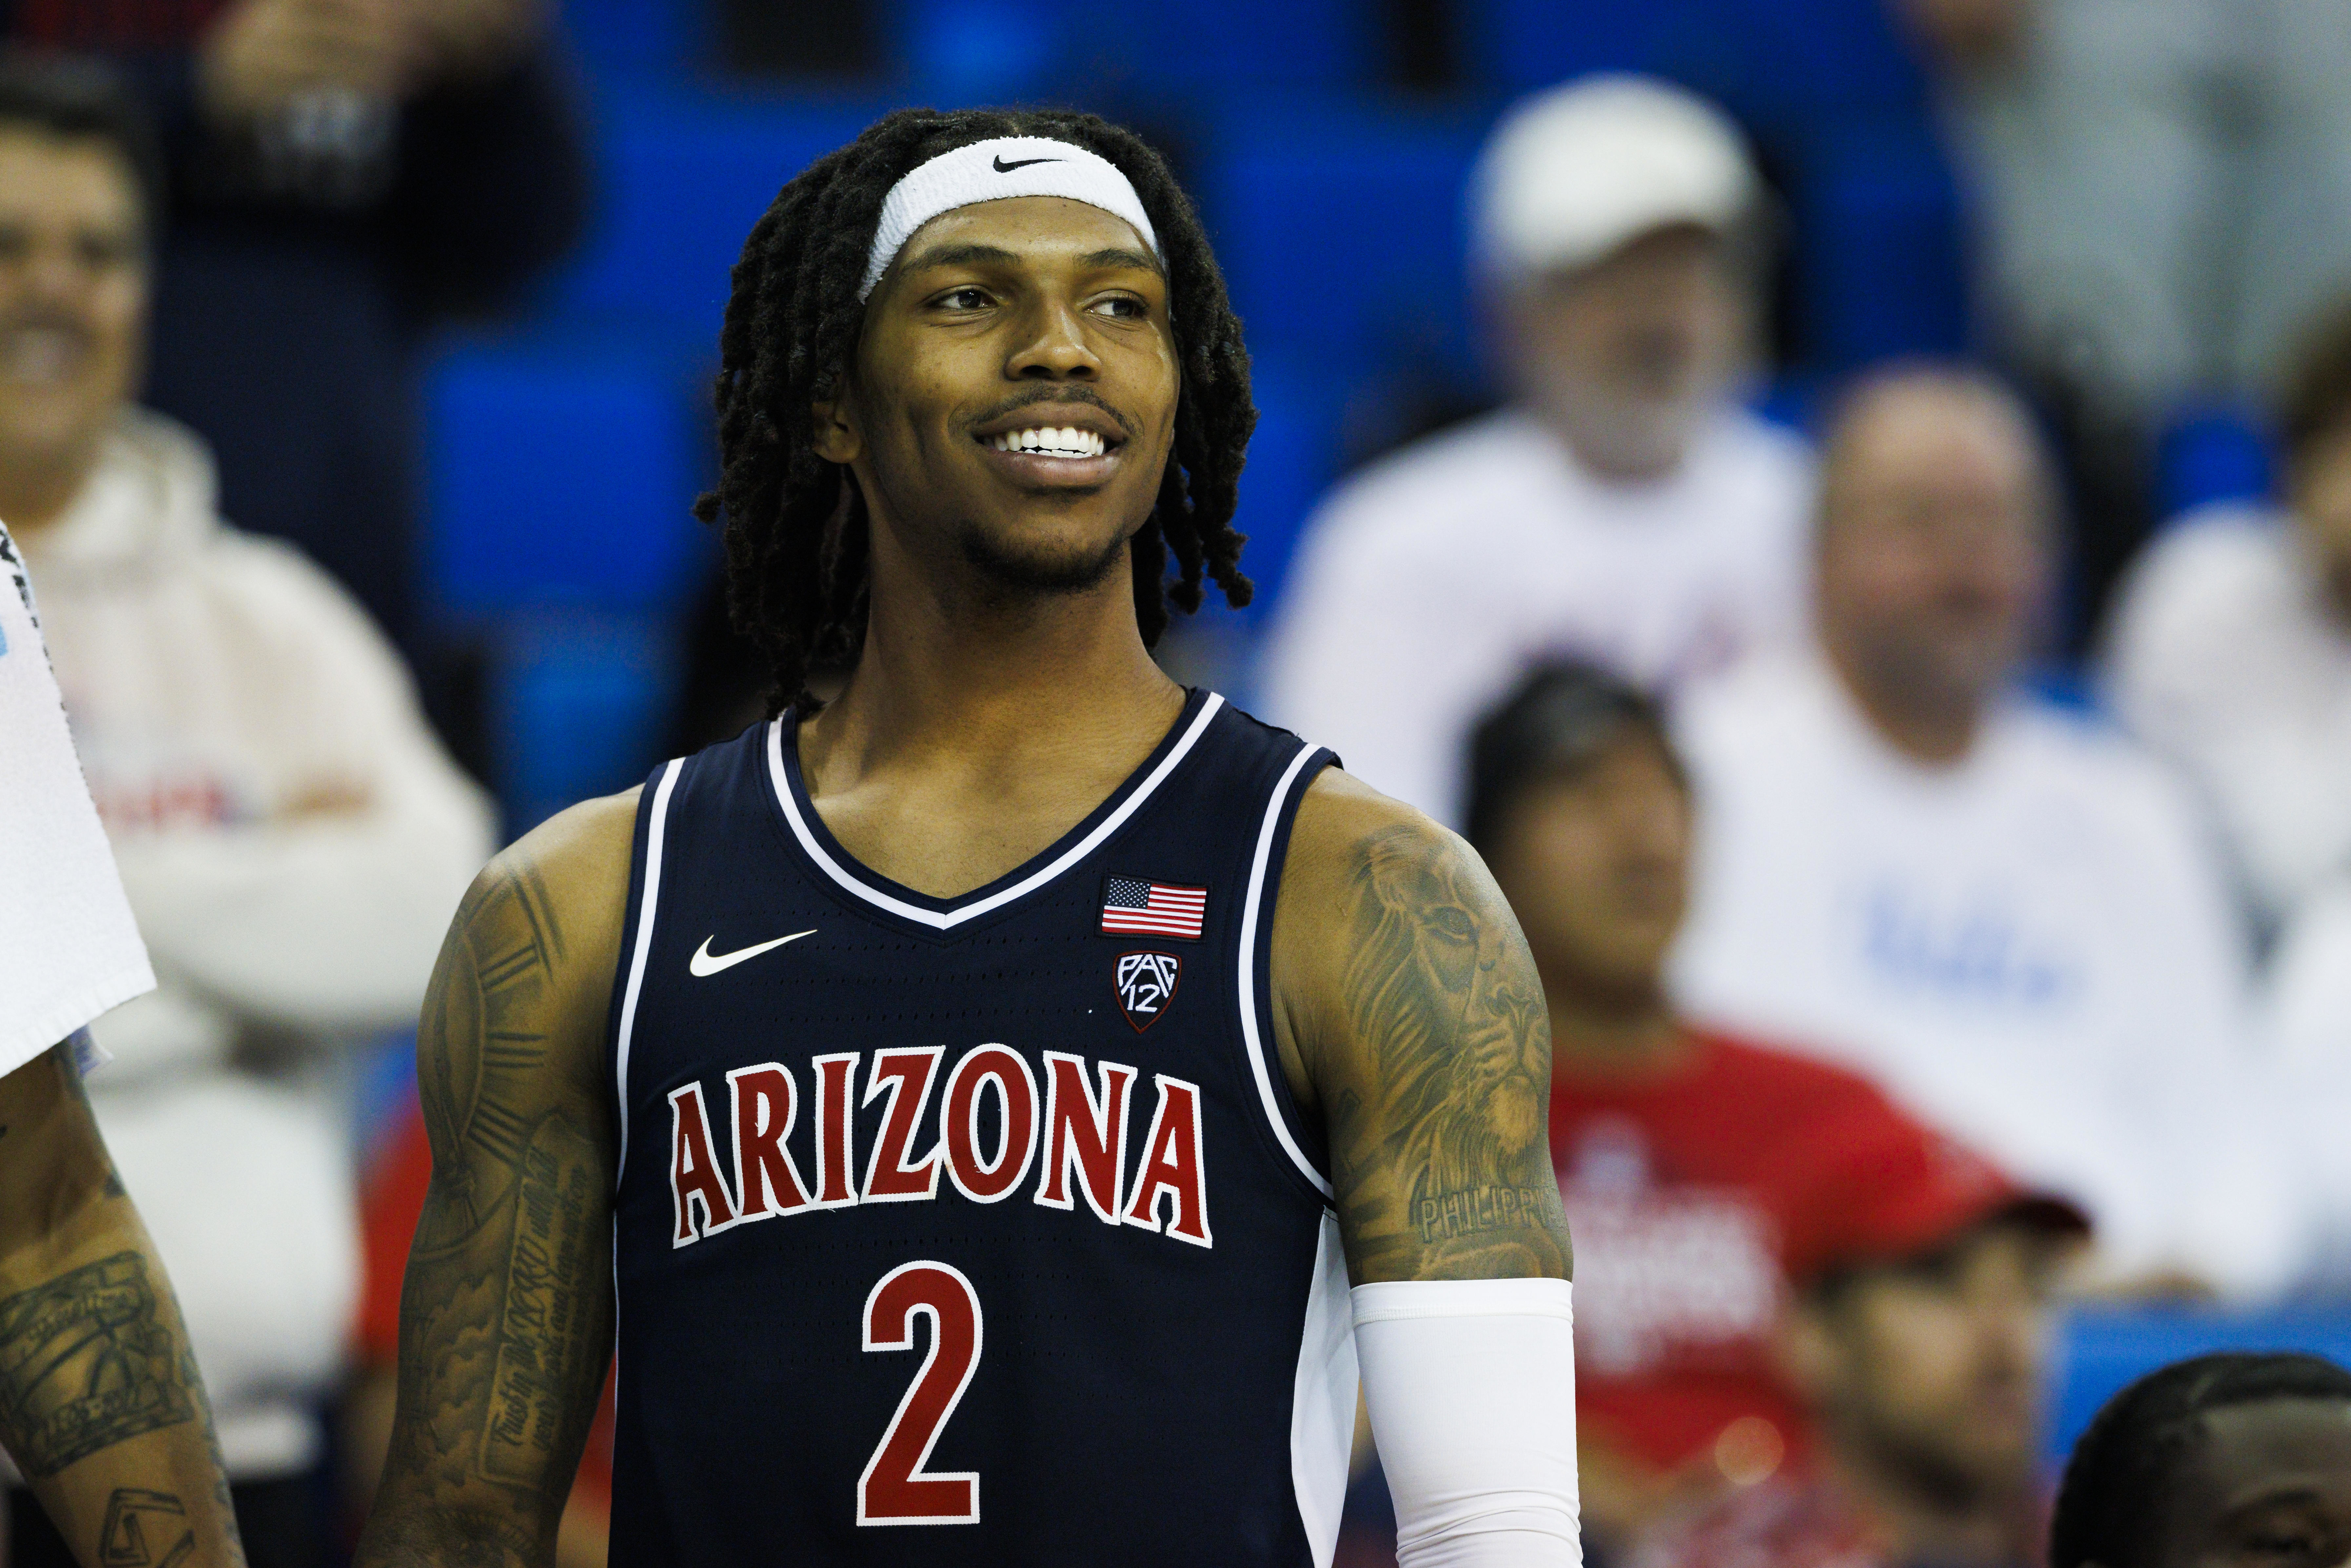 Basketball player in an Arizona jersey smiles during a game